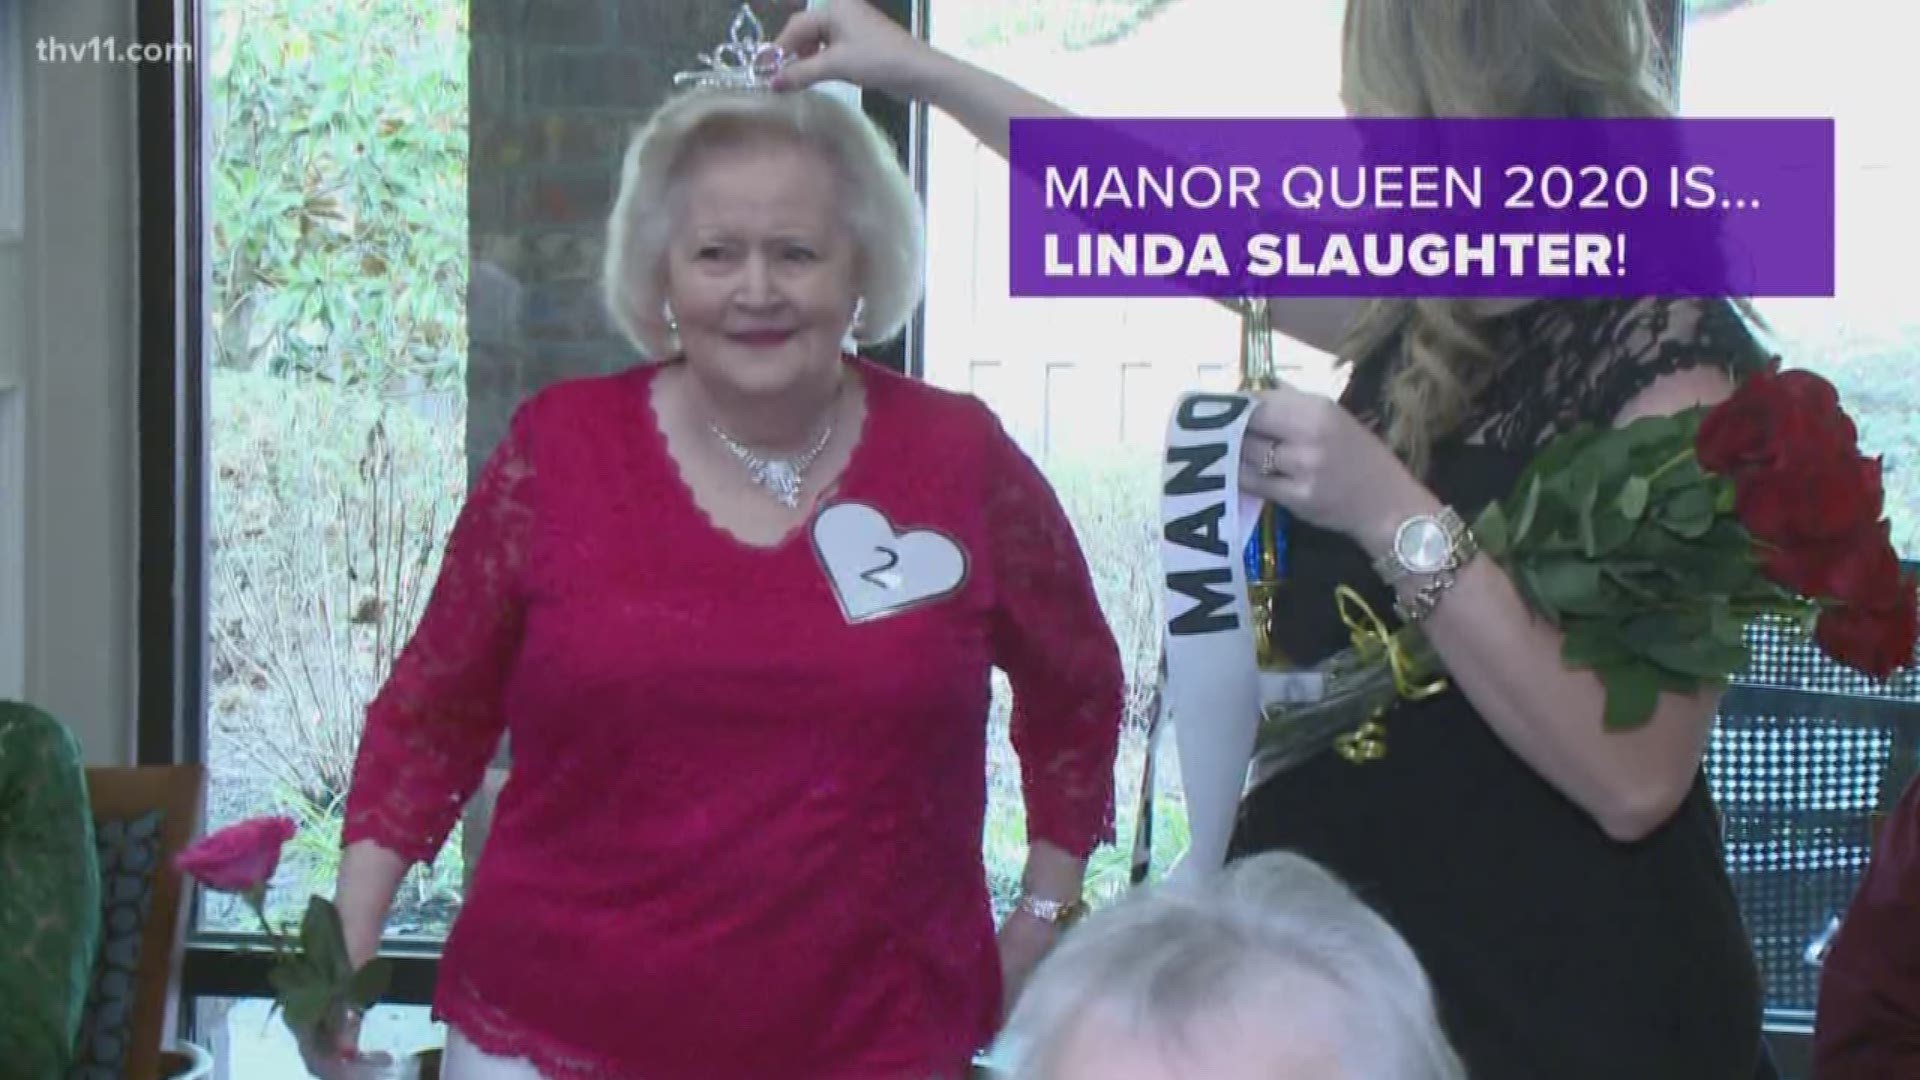 It's prom season for high school students, but this beauty pageant shows you can be beautiful at any age.